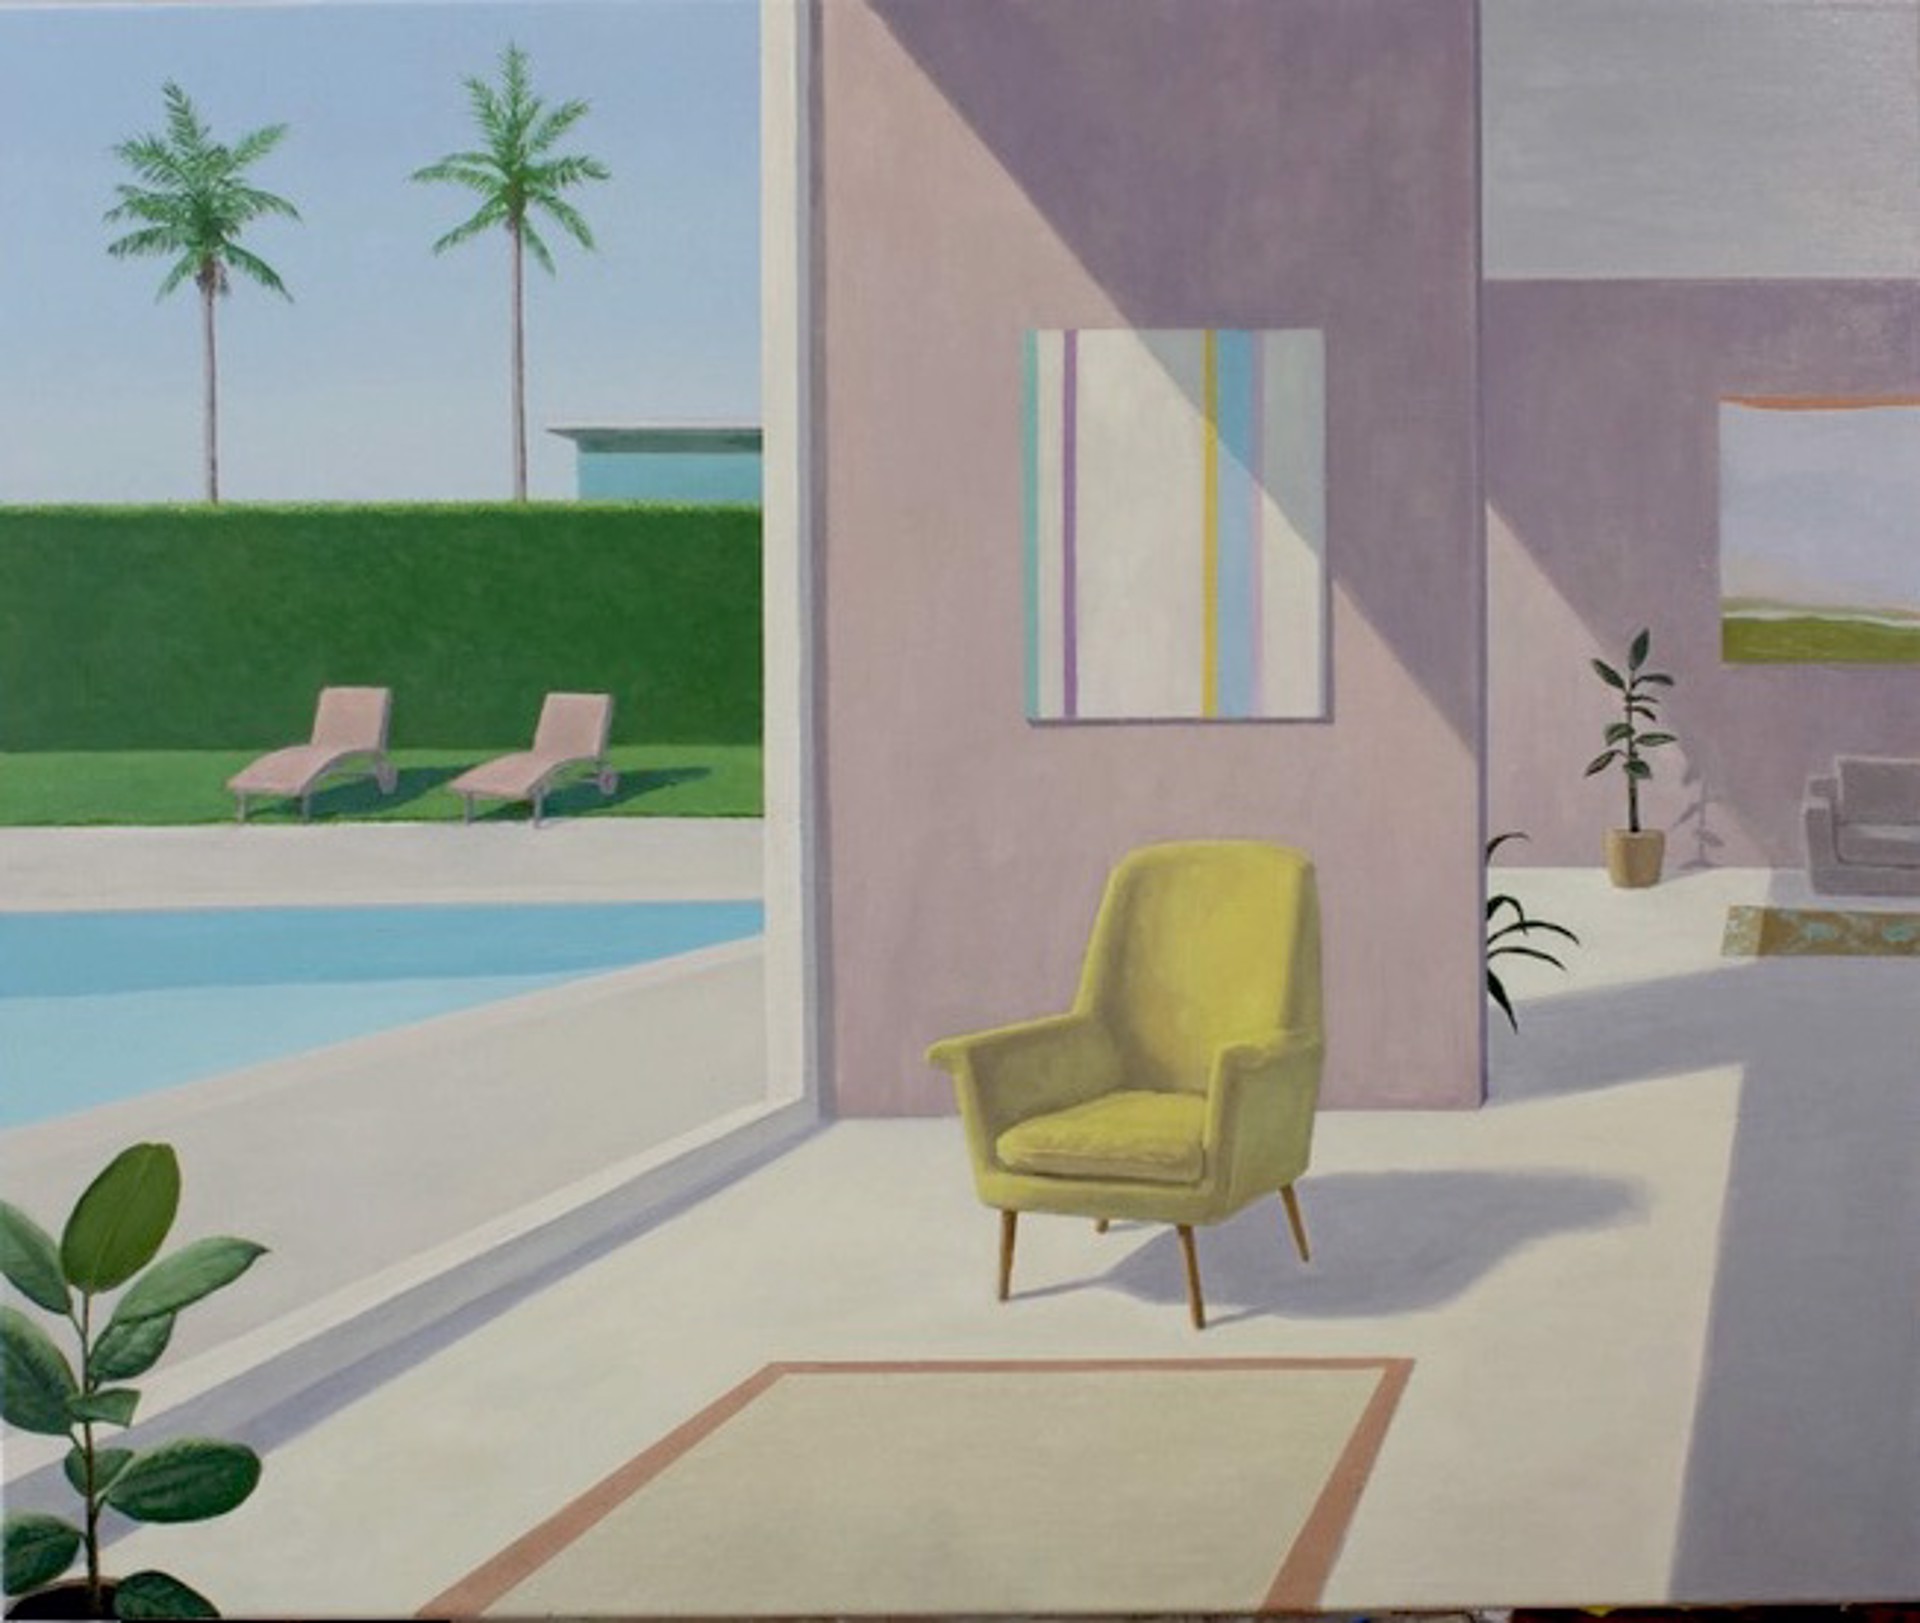 Sitting Room by Patrick St. Clair